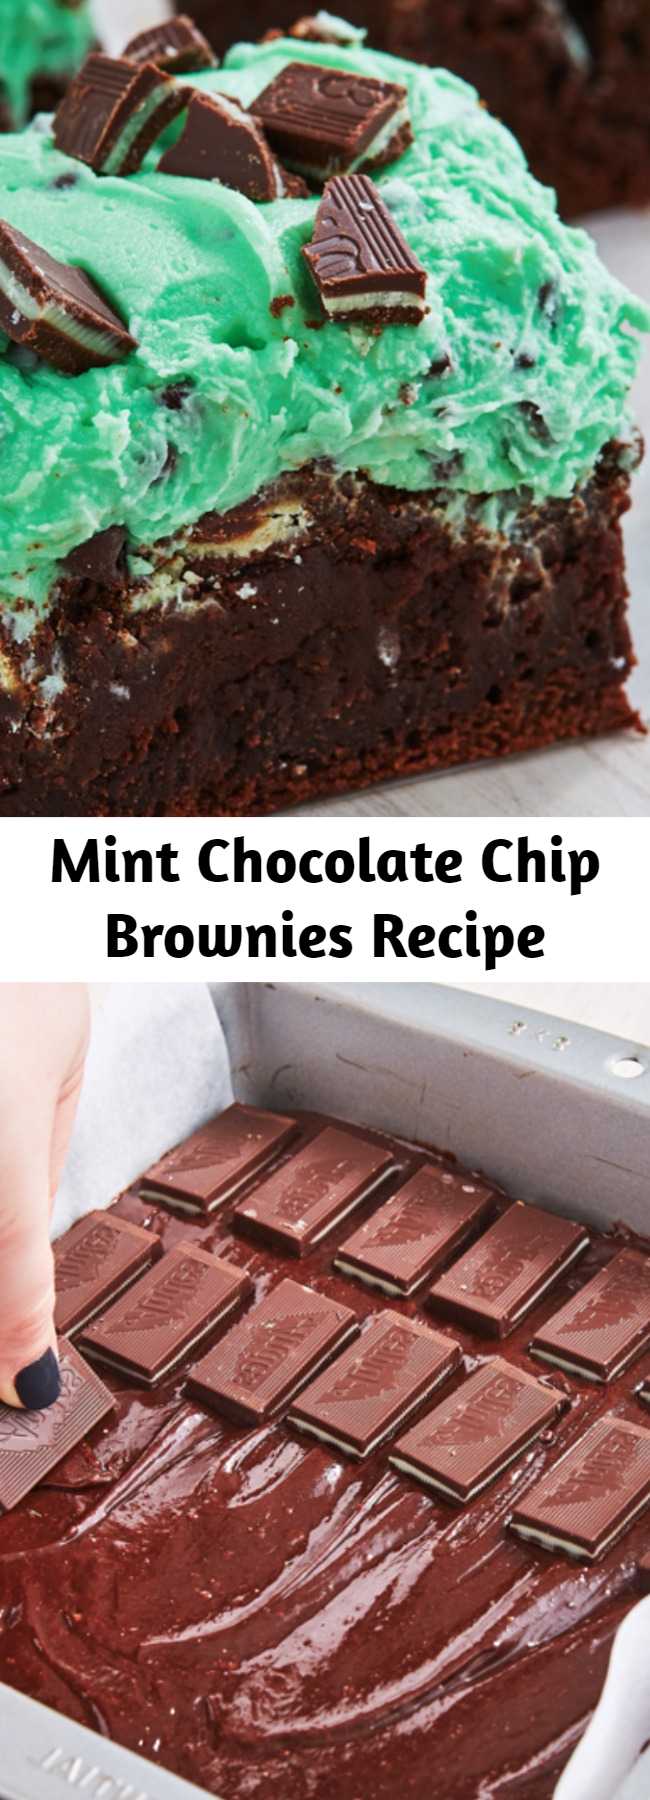 Mint Chocolate Chip Brownies Recipe - These Mint Chocolate Chip Brownies are what mint and chocolate dreams are made of.